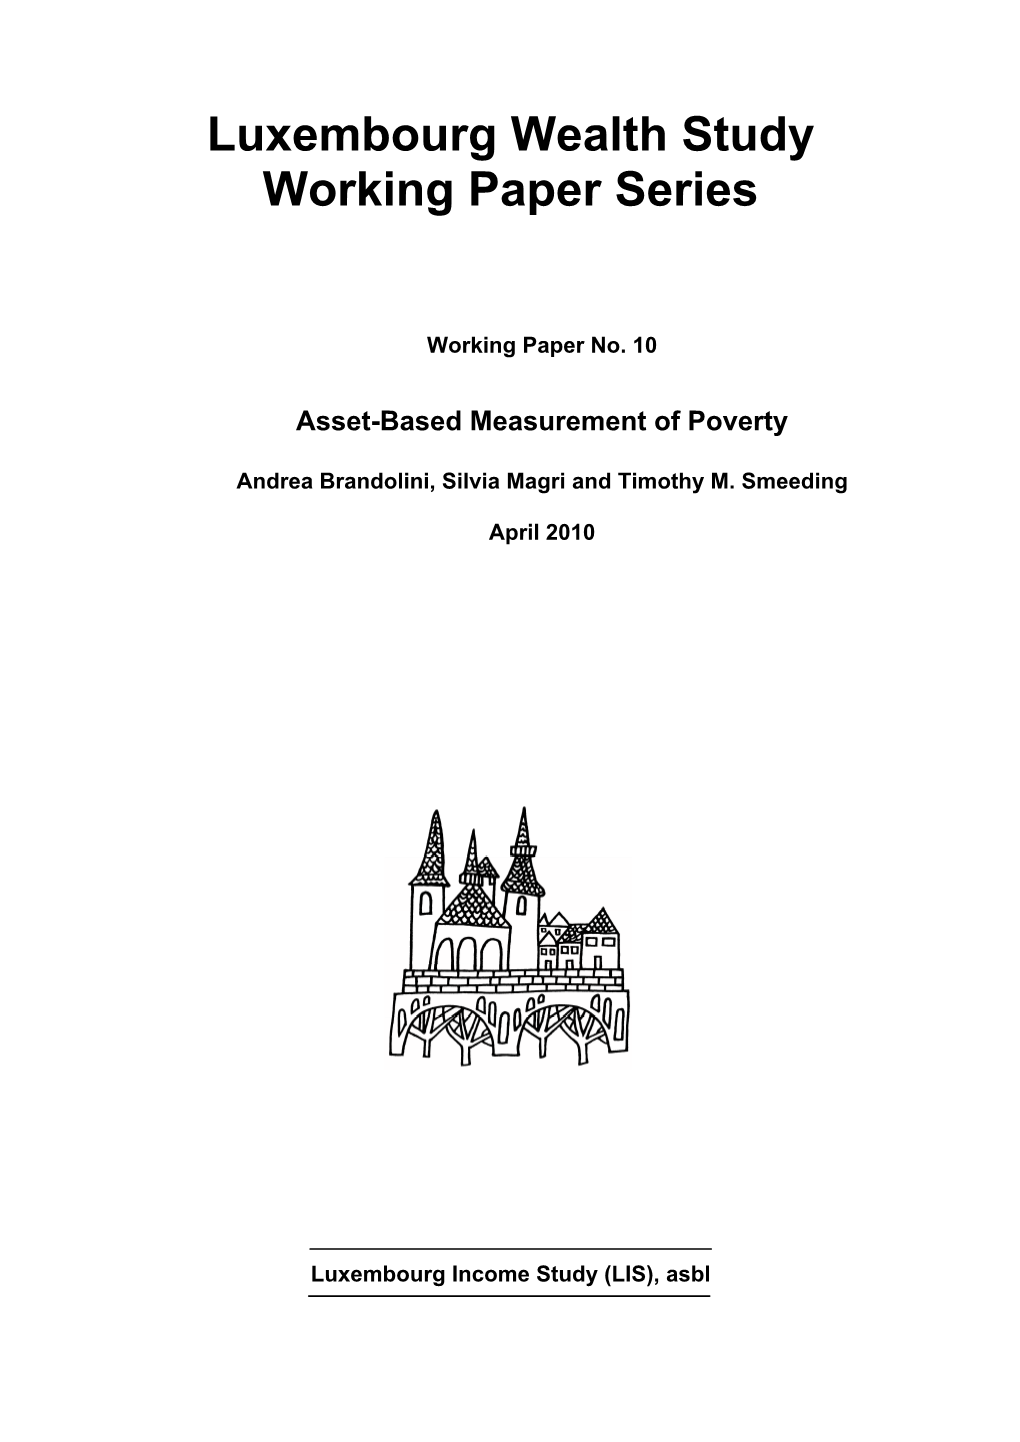 Luxembourg Wealth Study Working Paper Series